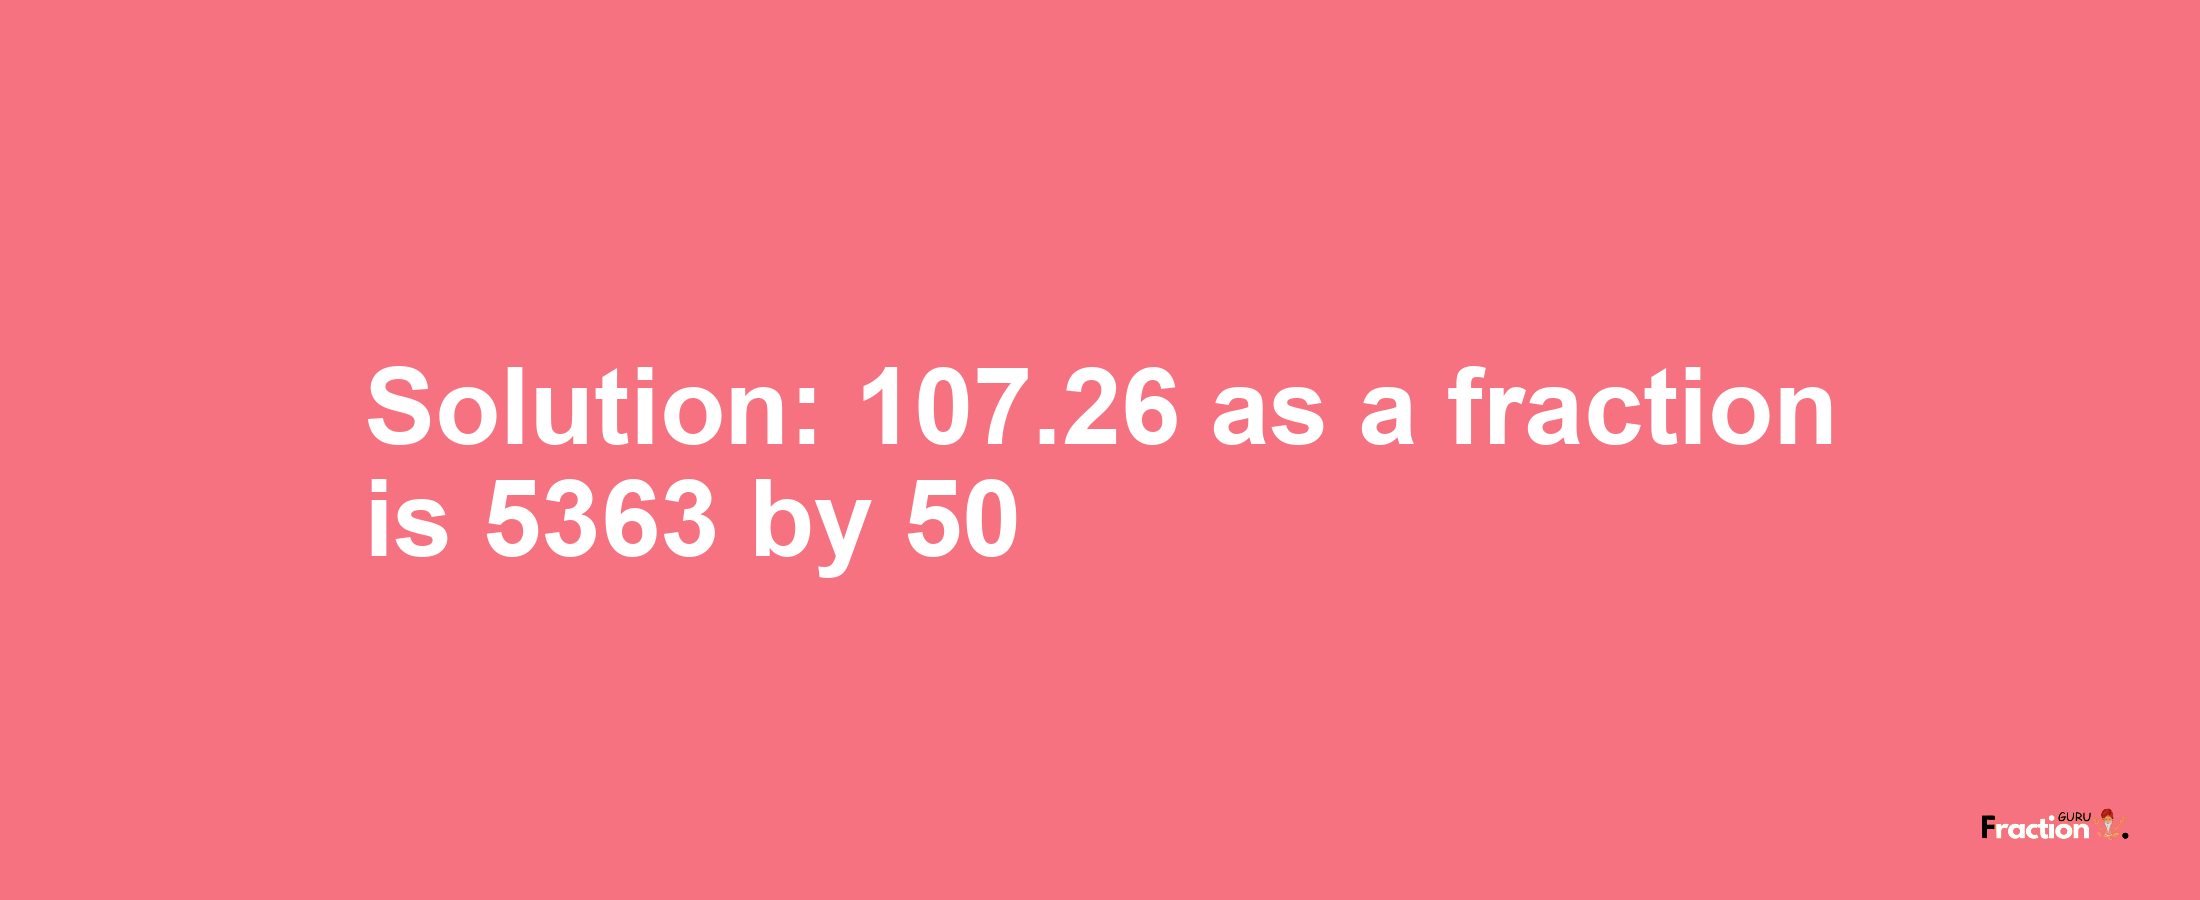 Solution:107.26 as a fraction is 5363/50